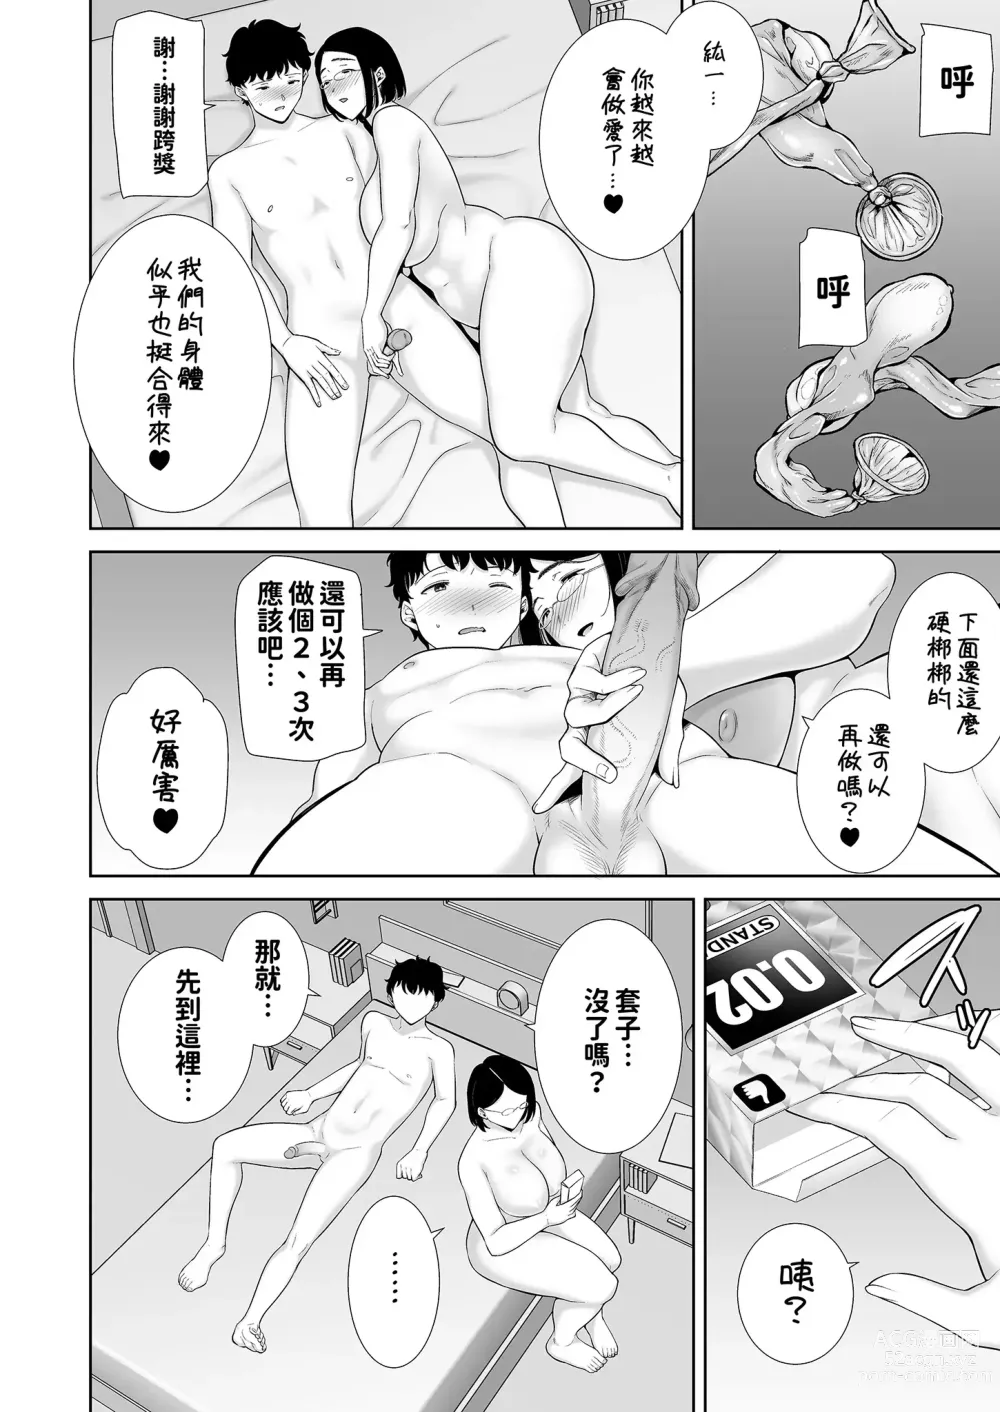 Page 53 of doujinshi KanoMama Syndrome 1 glass ver